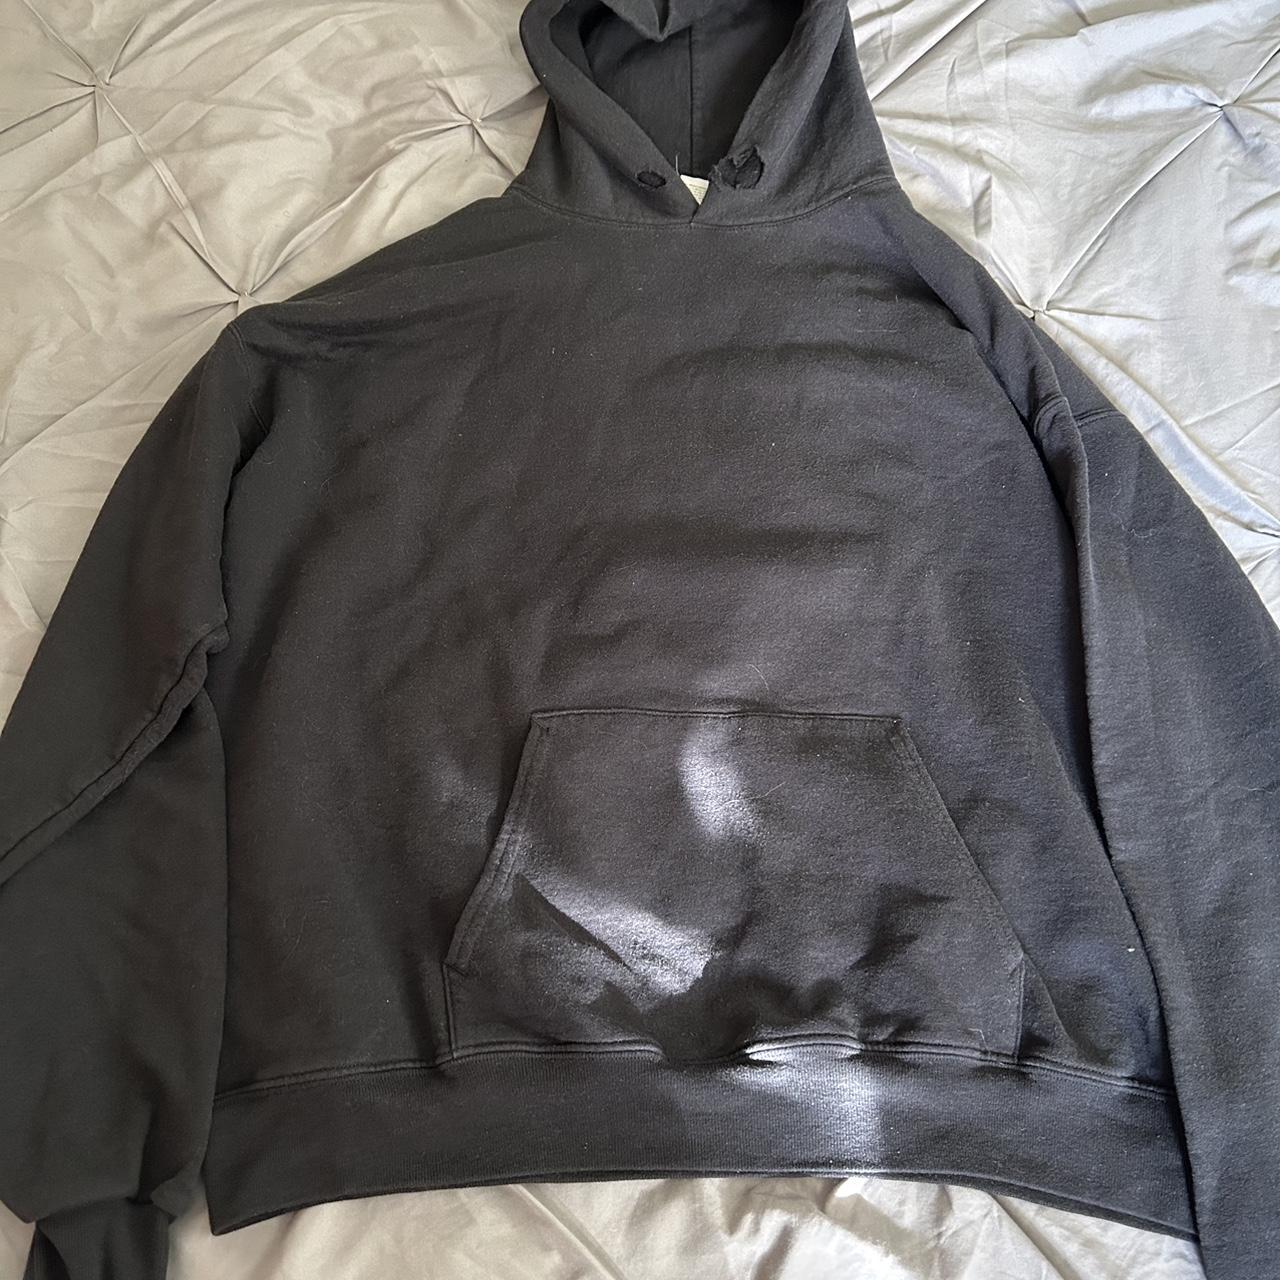 Distressed Unbranded Faded Hoodie Size L Two hole... - Depop